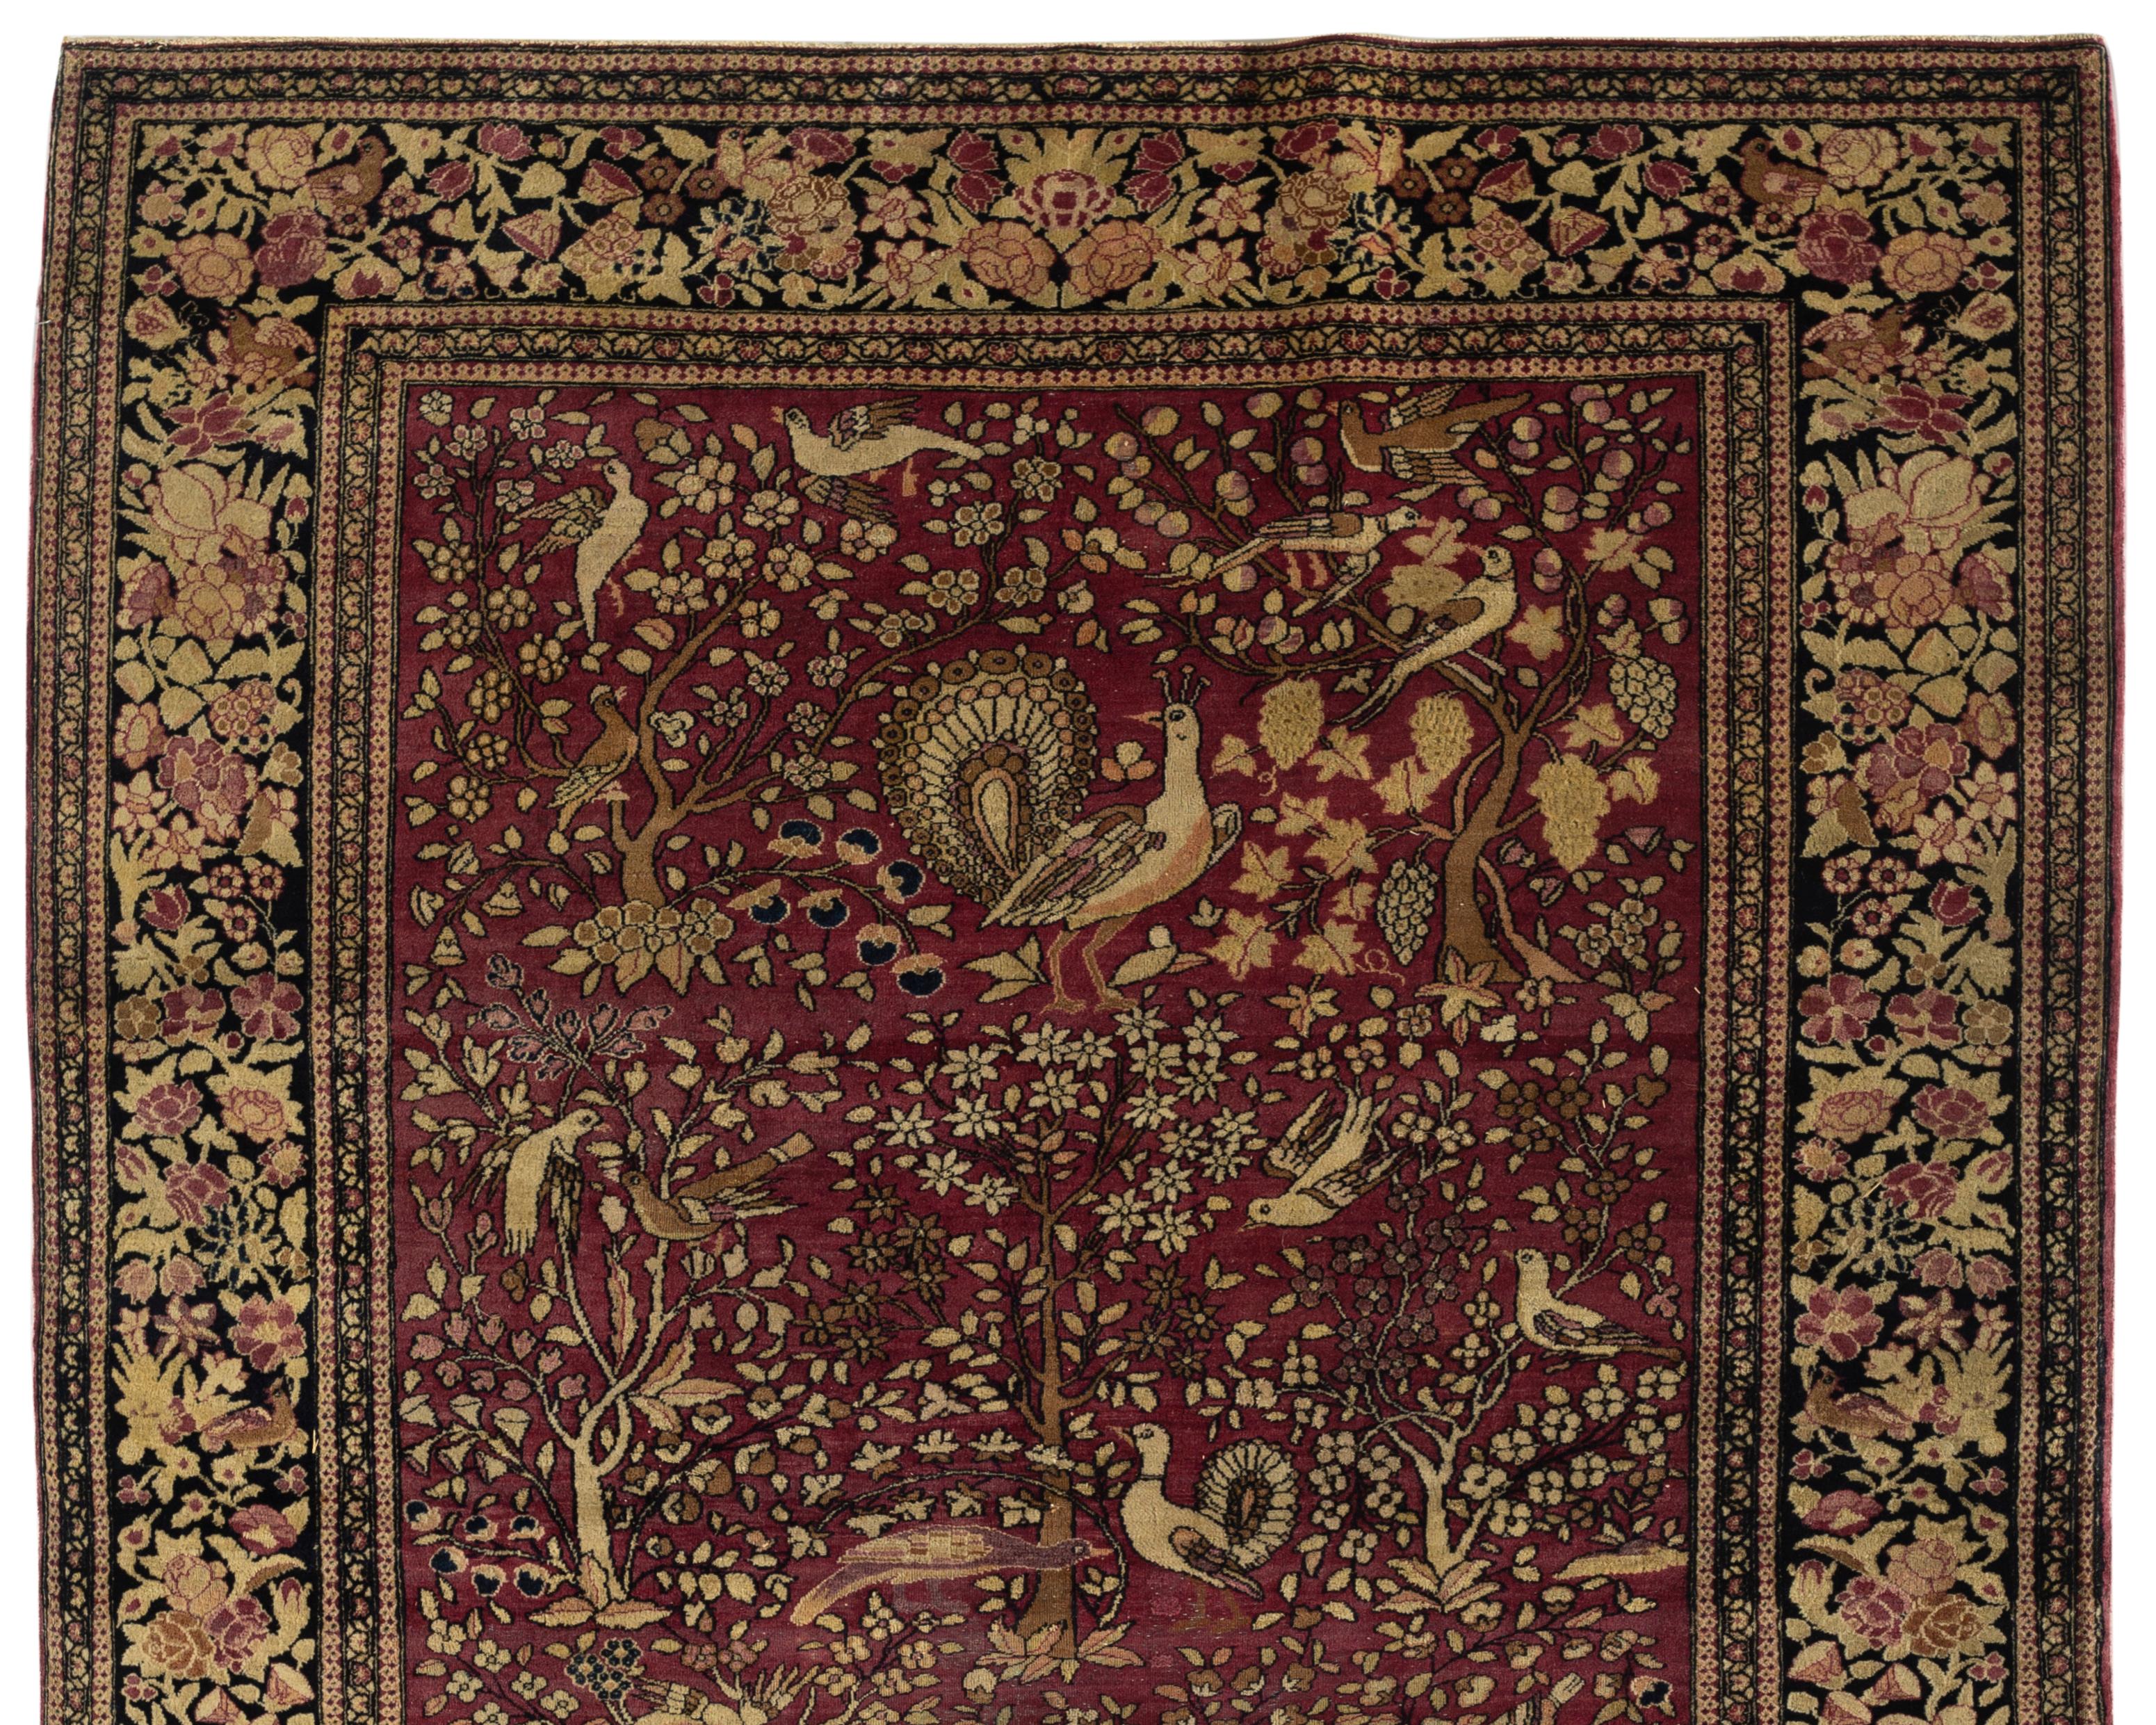 Hand-Woven Antique Isphahan Pictorial Rug, circa 1880 For Sale